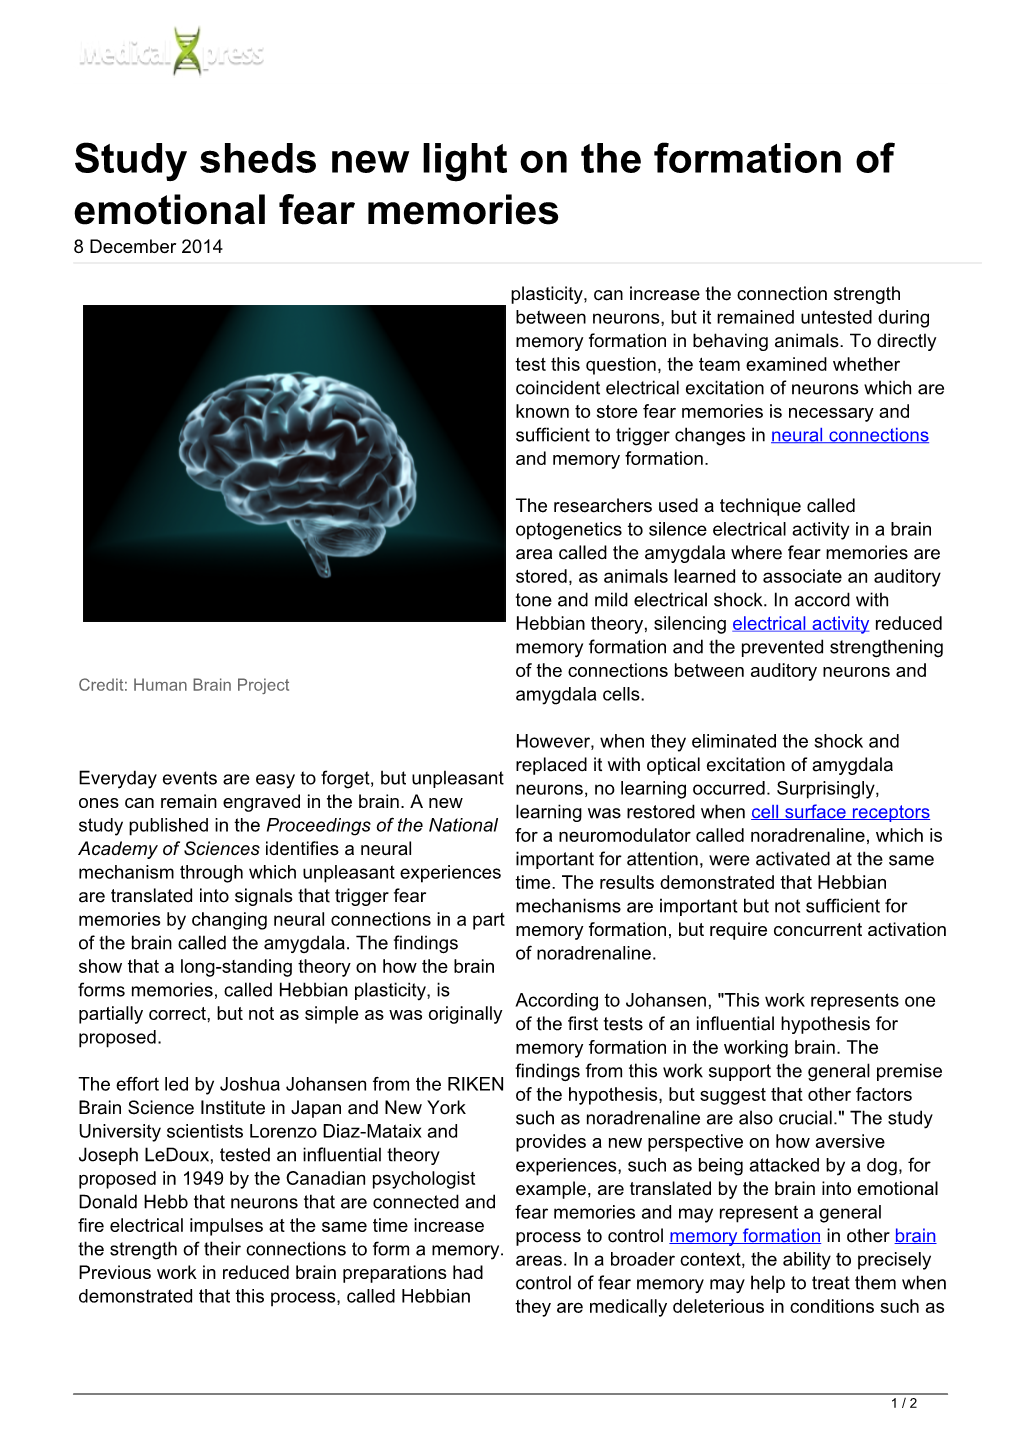 Study Sheds New Light on the Formation of Emotional Fear Memories 8 December 2014